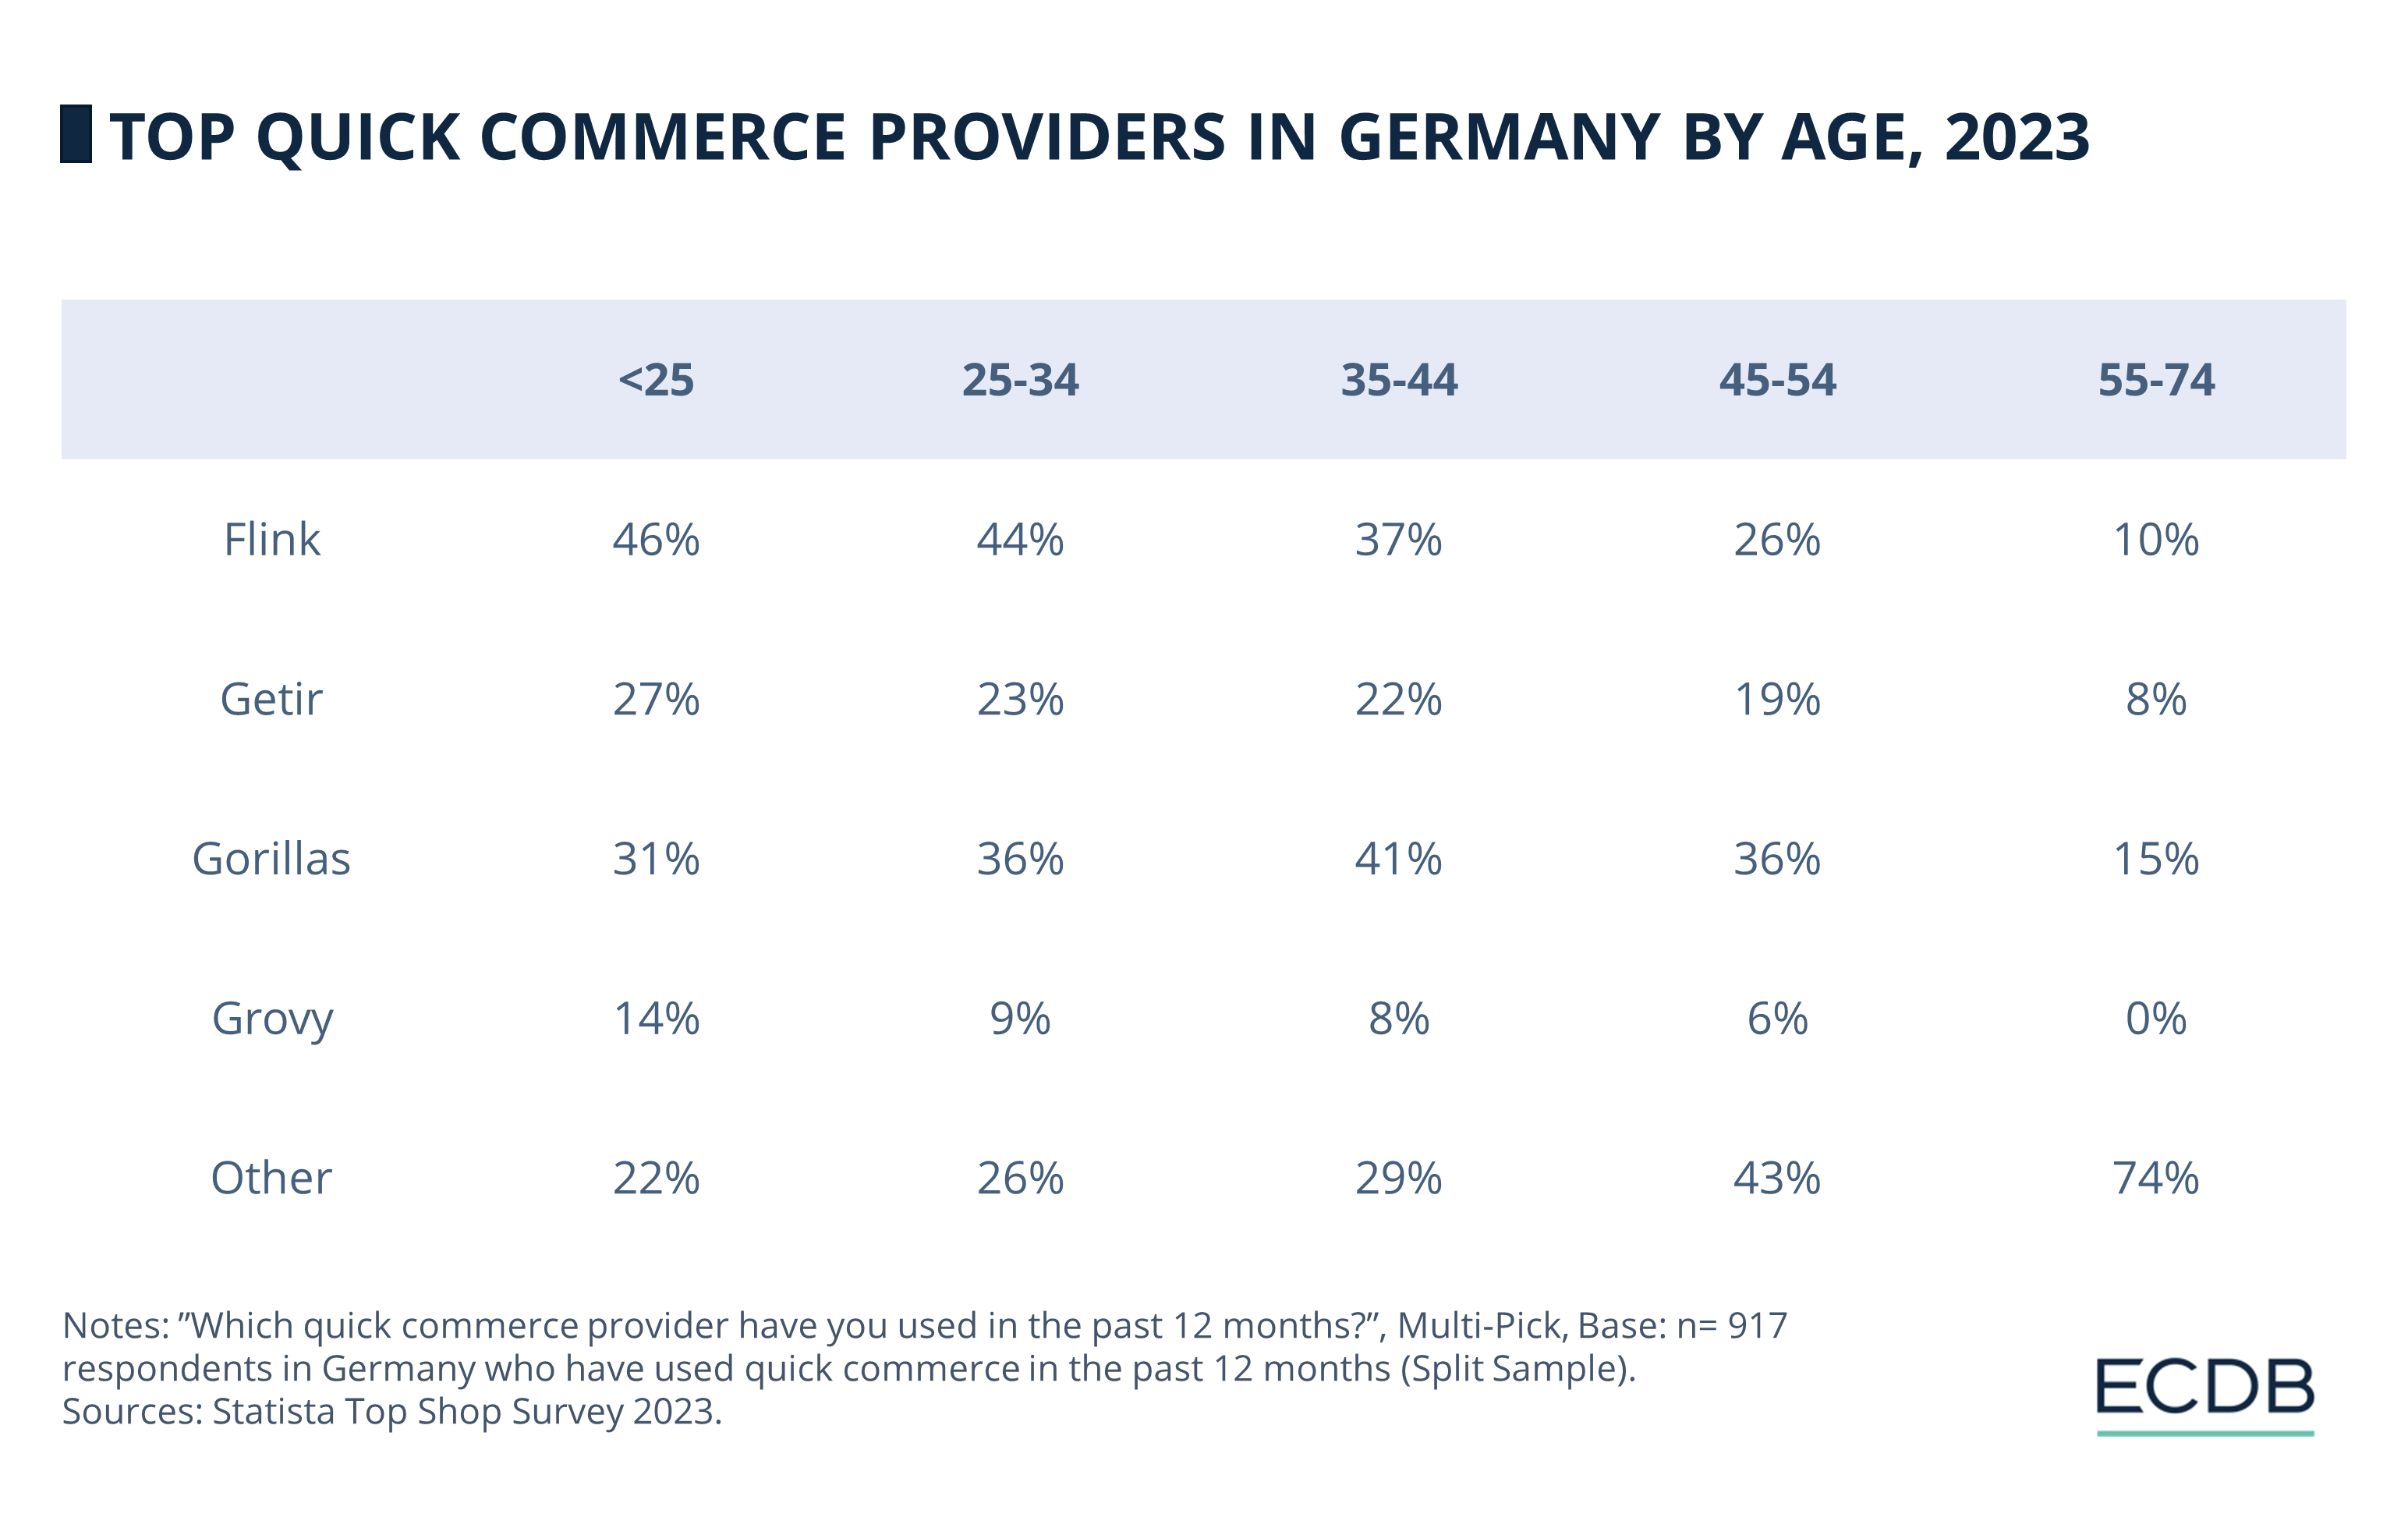 Top Quick Commerce Providers in Germany by Age, 2023